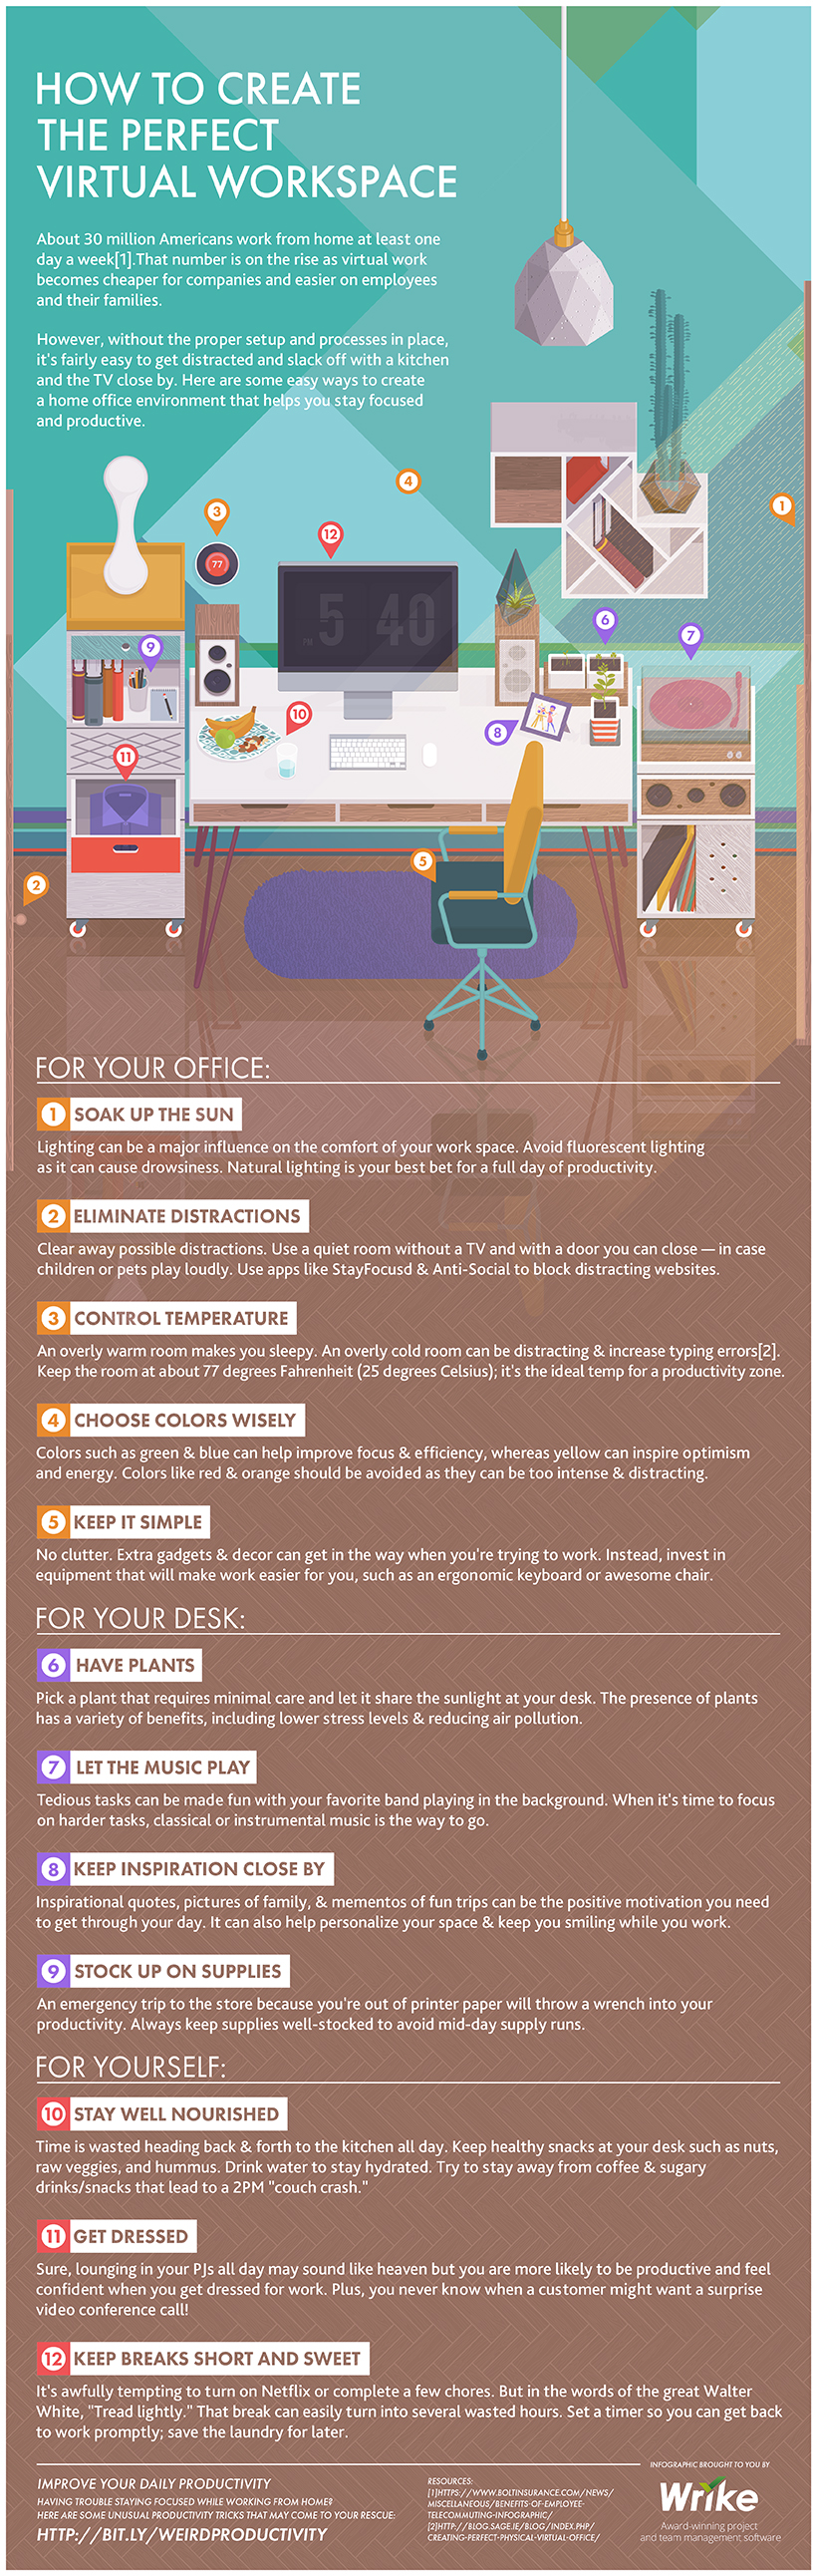 How to Create Your Perfect Remote Work Environment